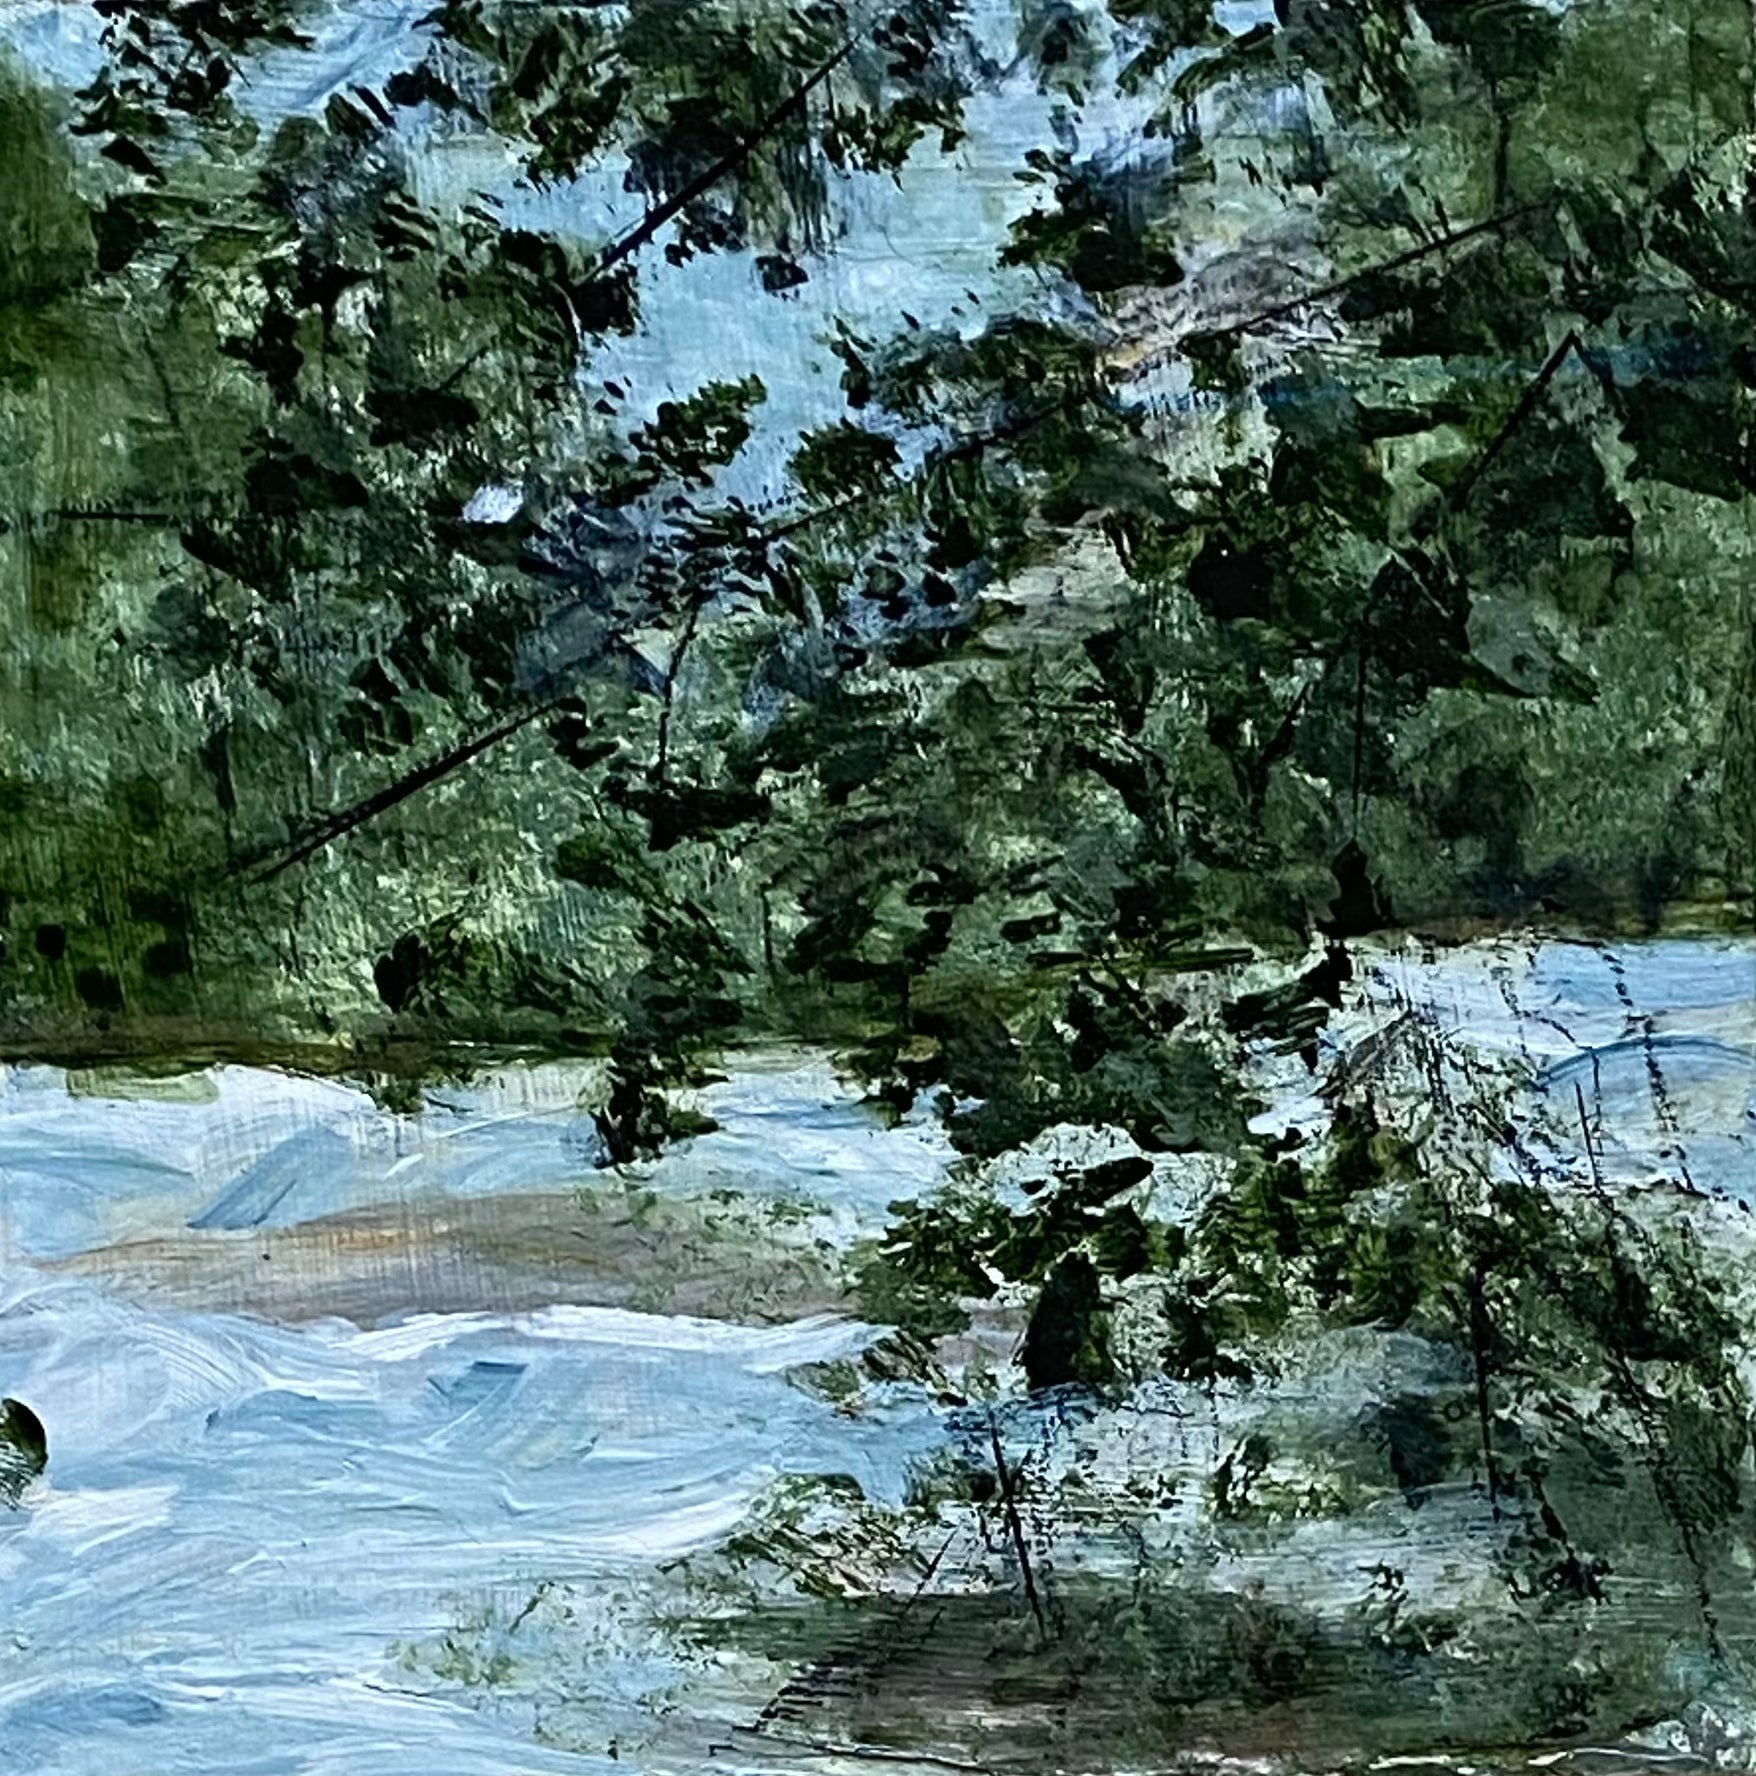 The Chattahoochee, 2021, Acrylic on panel, 6 x 6 inches, Unframed